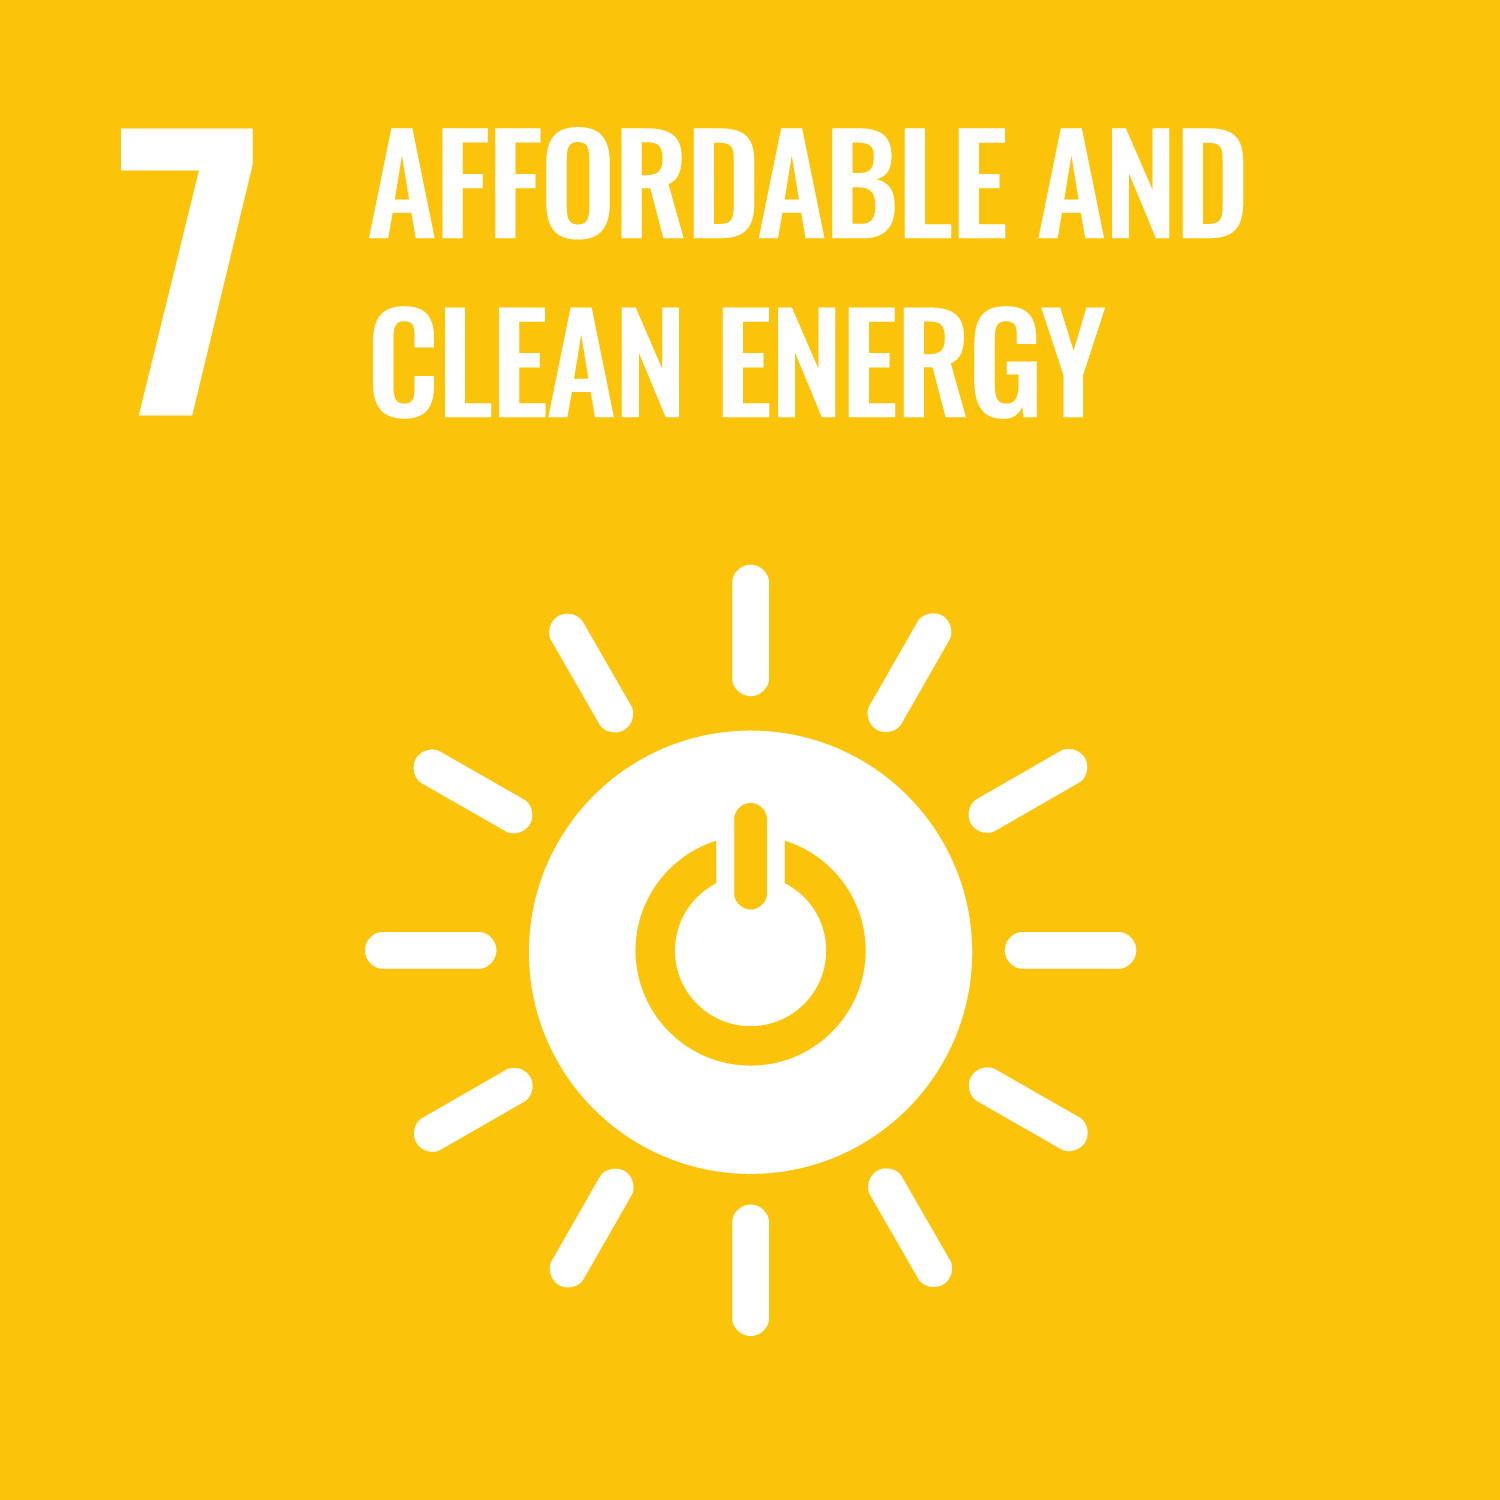 UN Sustainable goal - Affordable and clean energy